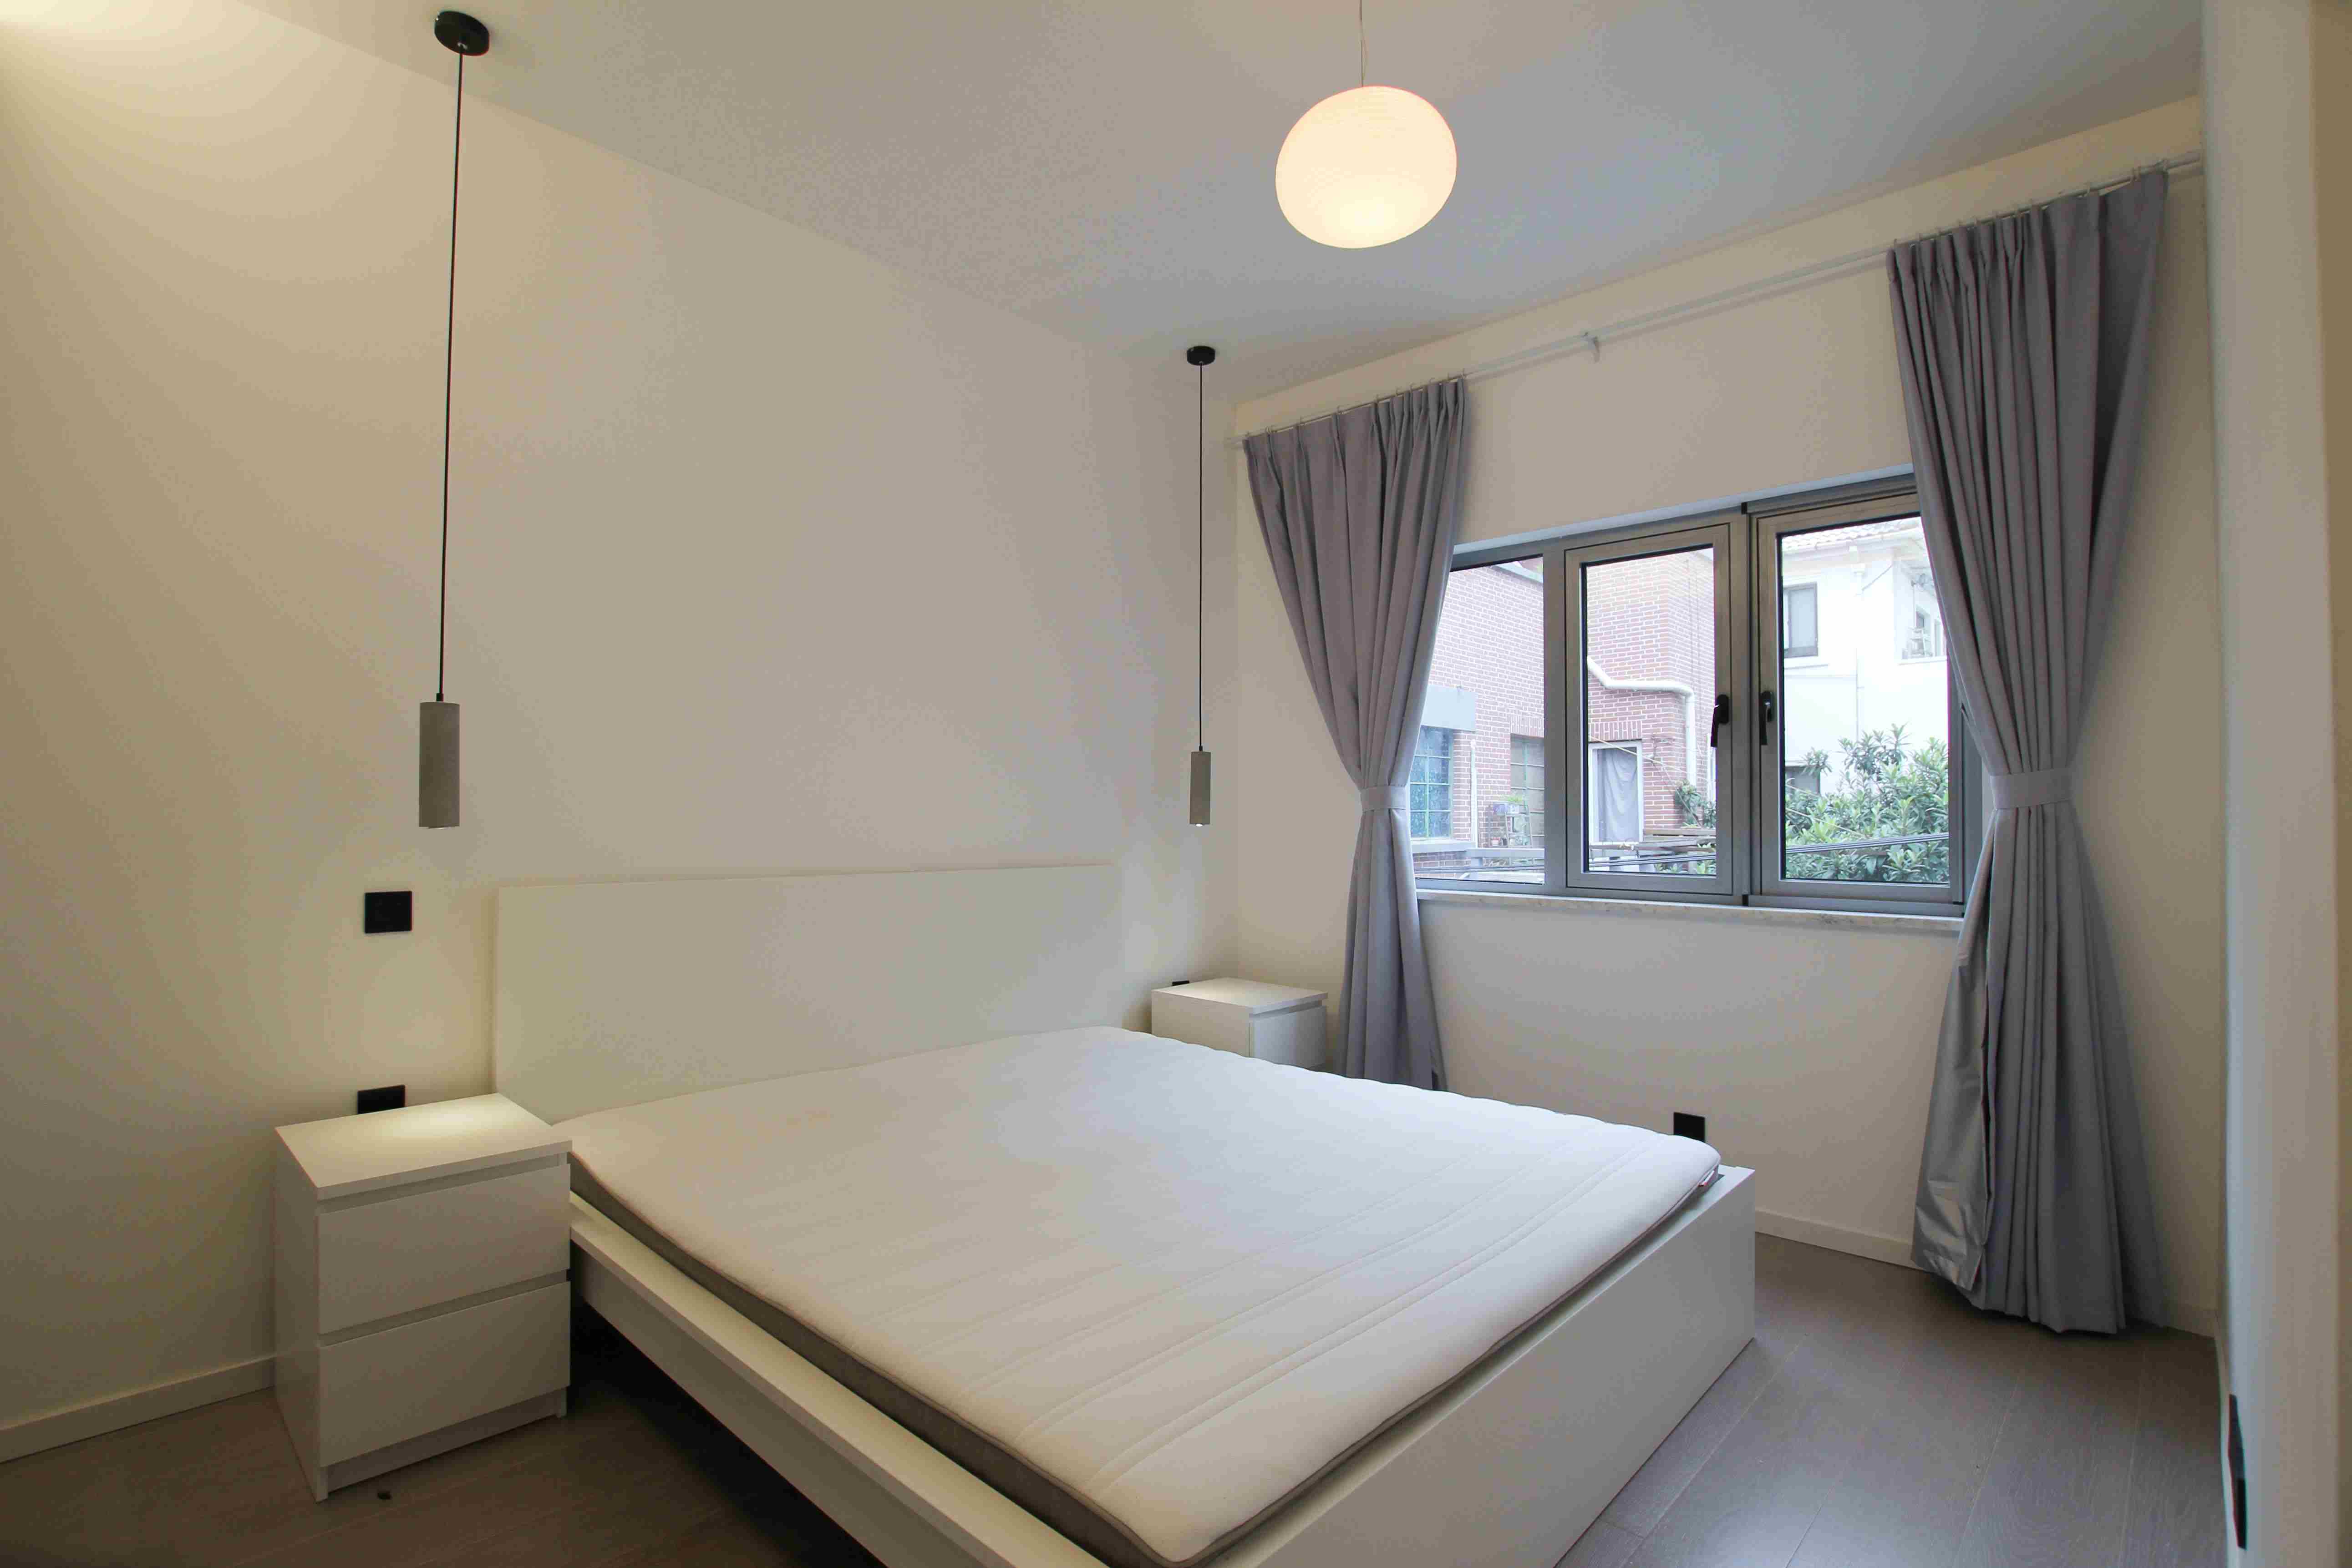 new bed Entire Spacious 2F Apt in Renovated FFC Lane House for Rent in Shanghai